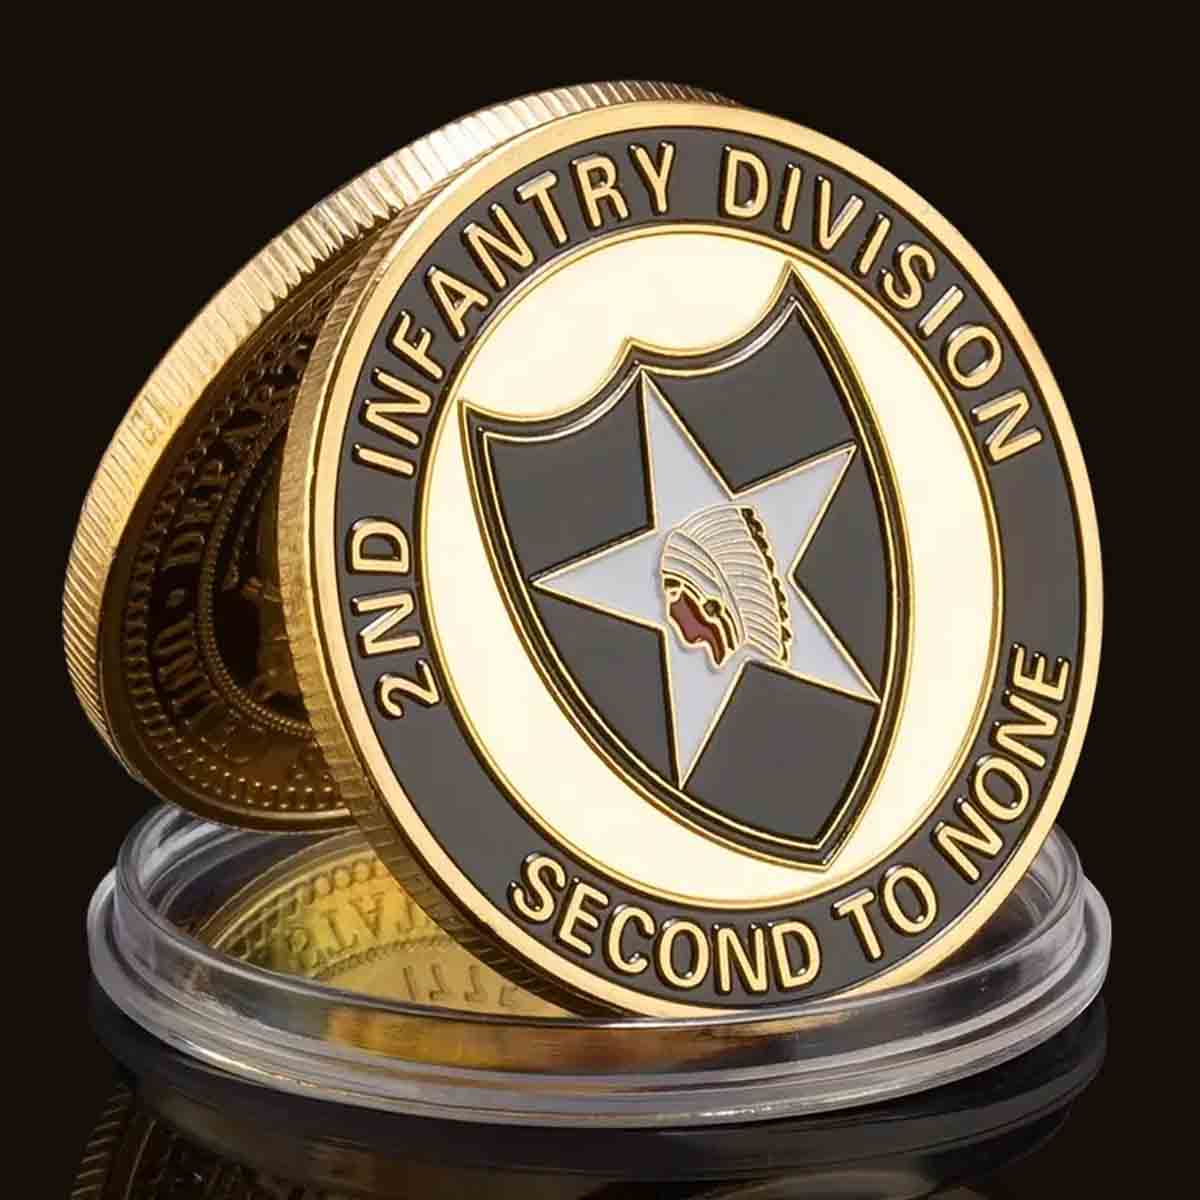 2nd Infantry Division "Second to None" Challenge Coin. High-quality Golden plating for a stunning shine and durability. Intricate design featuring the 2ID Motto. Comes in a protective plastic case to preserve its beauty and value. Patriot Gear USA American Outfitters